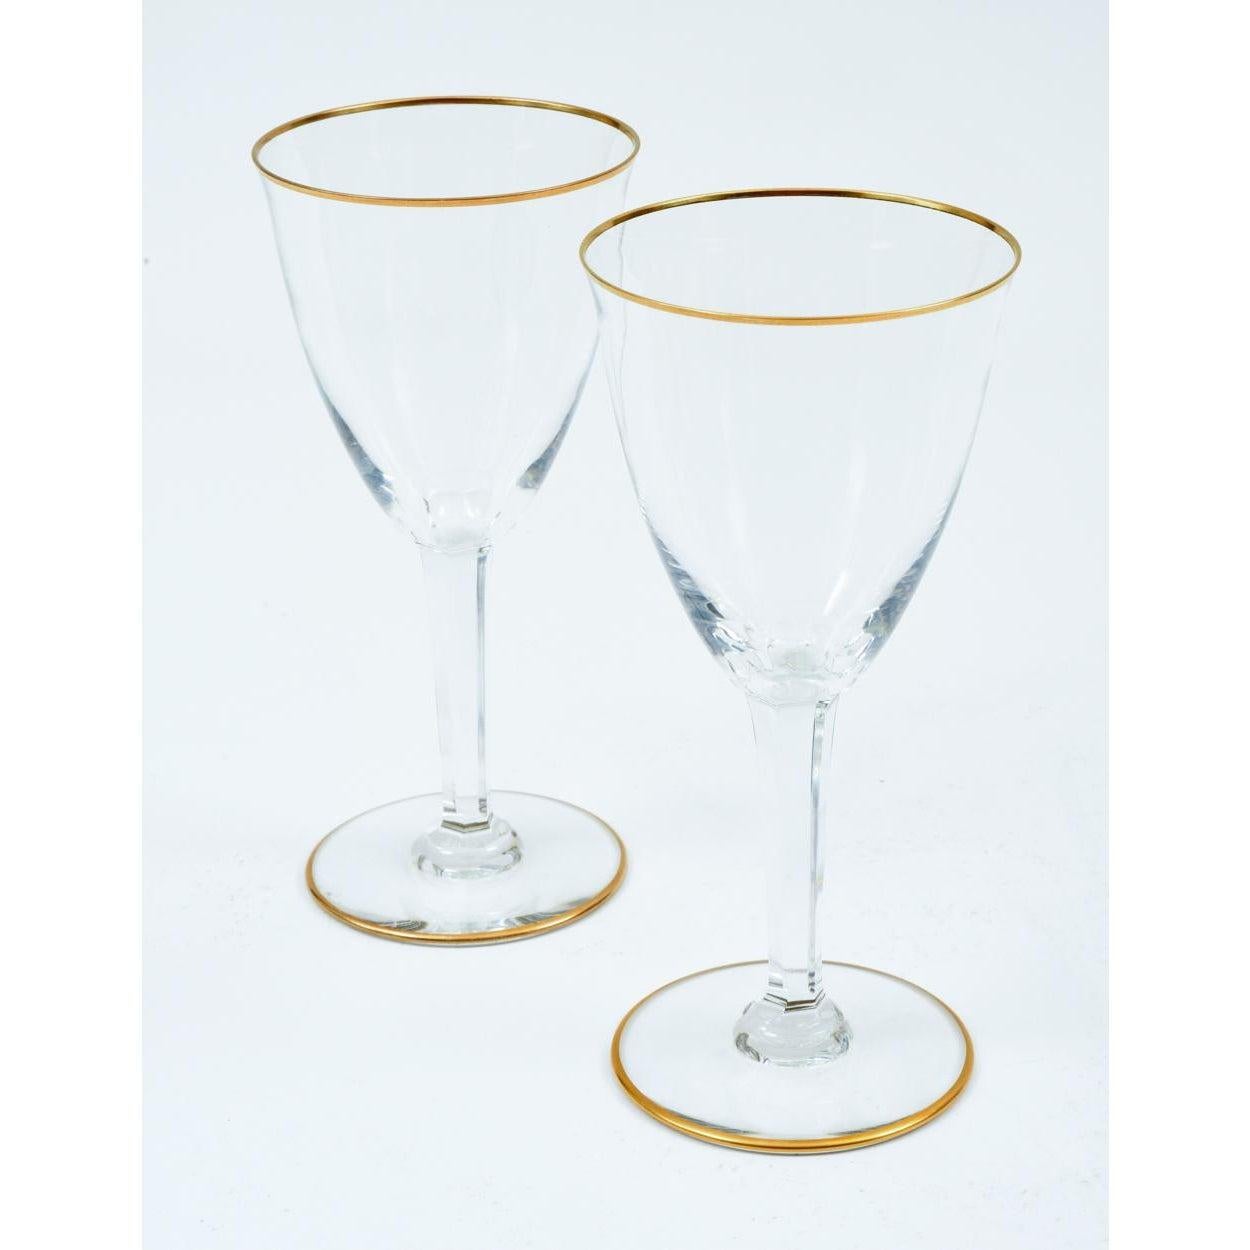 20th Century Baccarat Crystal Barware / Tableware Wine Service / 8 People For Sale